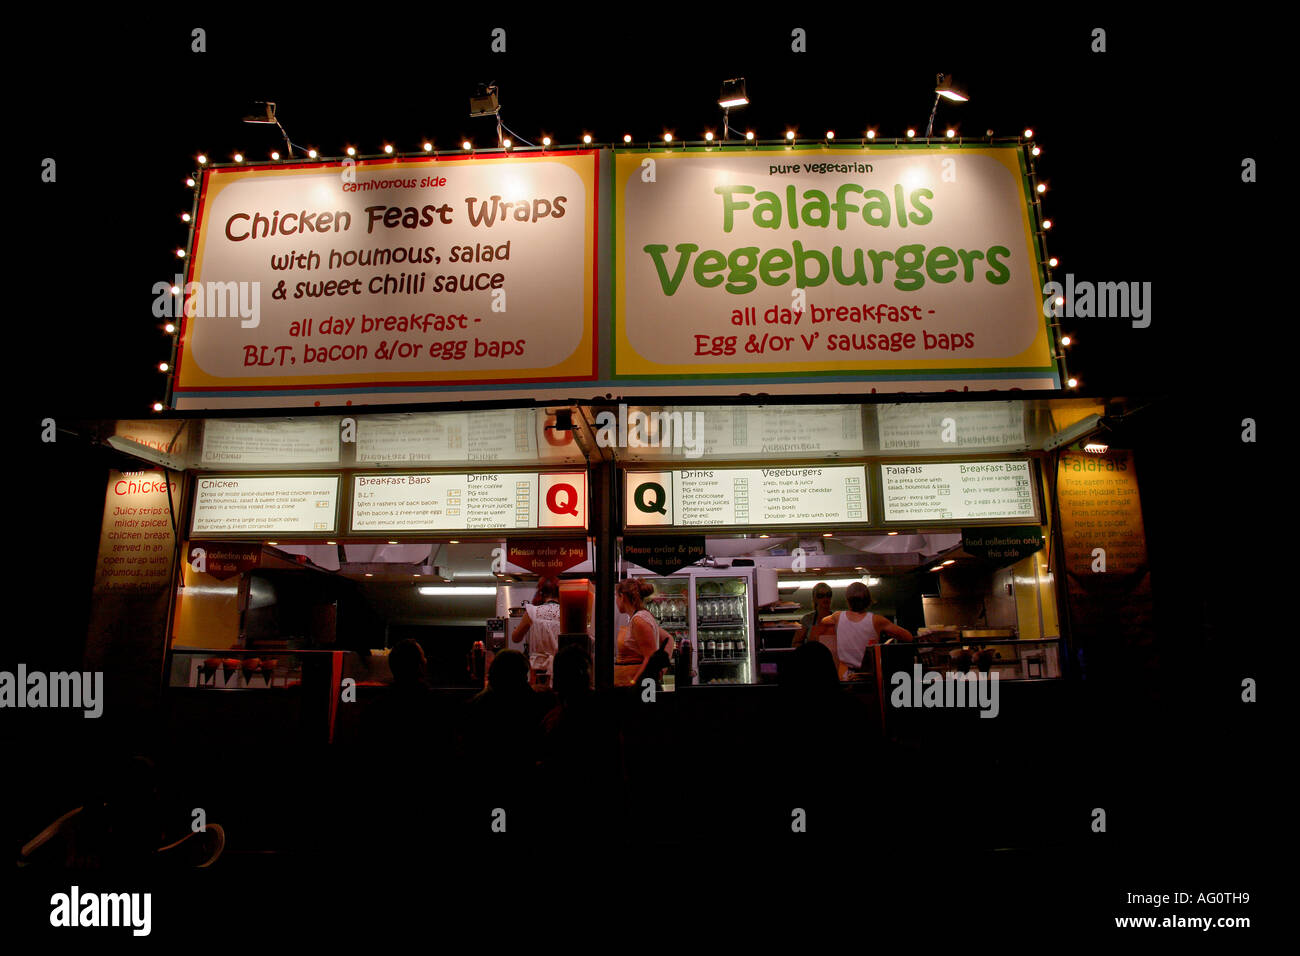 Chicken, falafal and vegeburger stall at night. Guilfest music festival, Guildford, Surrey, England Stock Photo